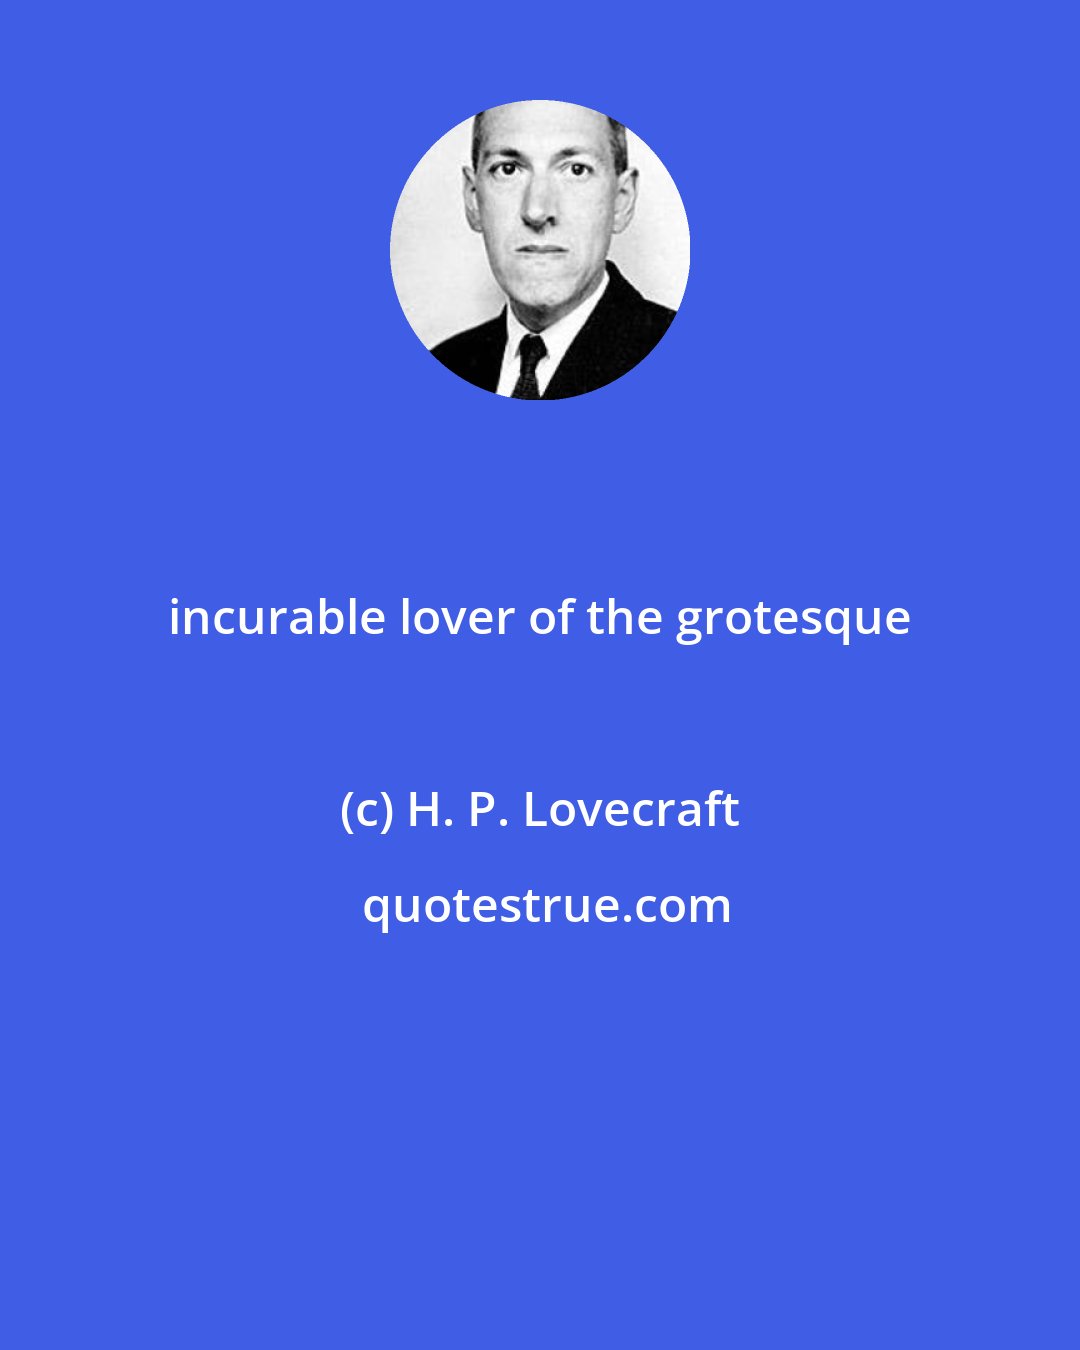 H. P. Lovecraft: incurable lover of the grotesque